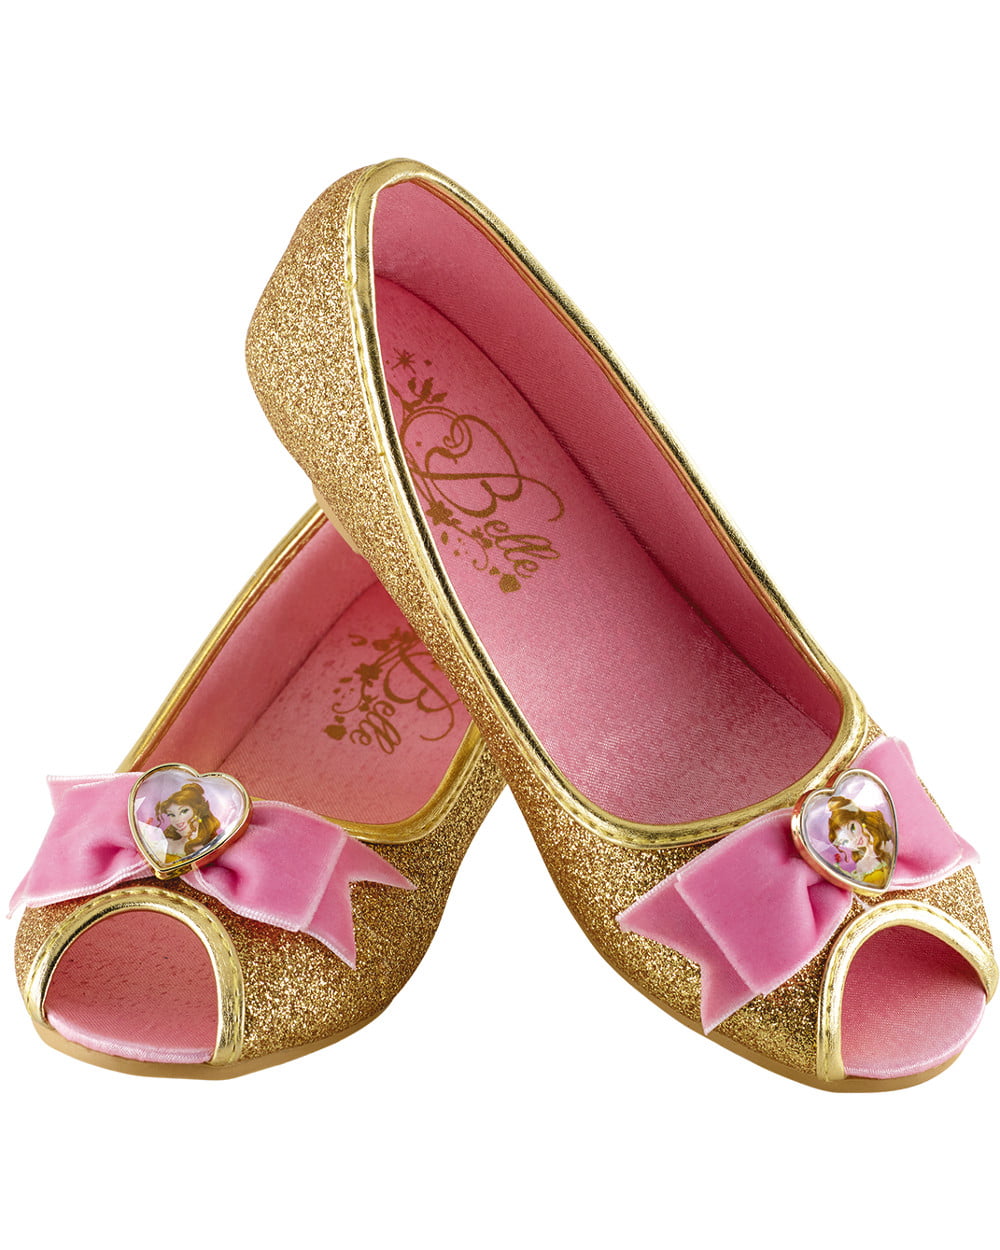 Girls Disney Princess Slippers Belle Beauty and The Beast Infant Size 11 Pink 